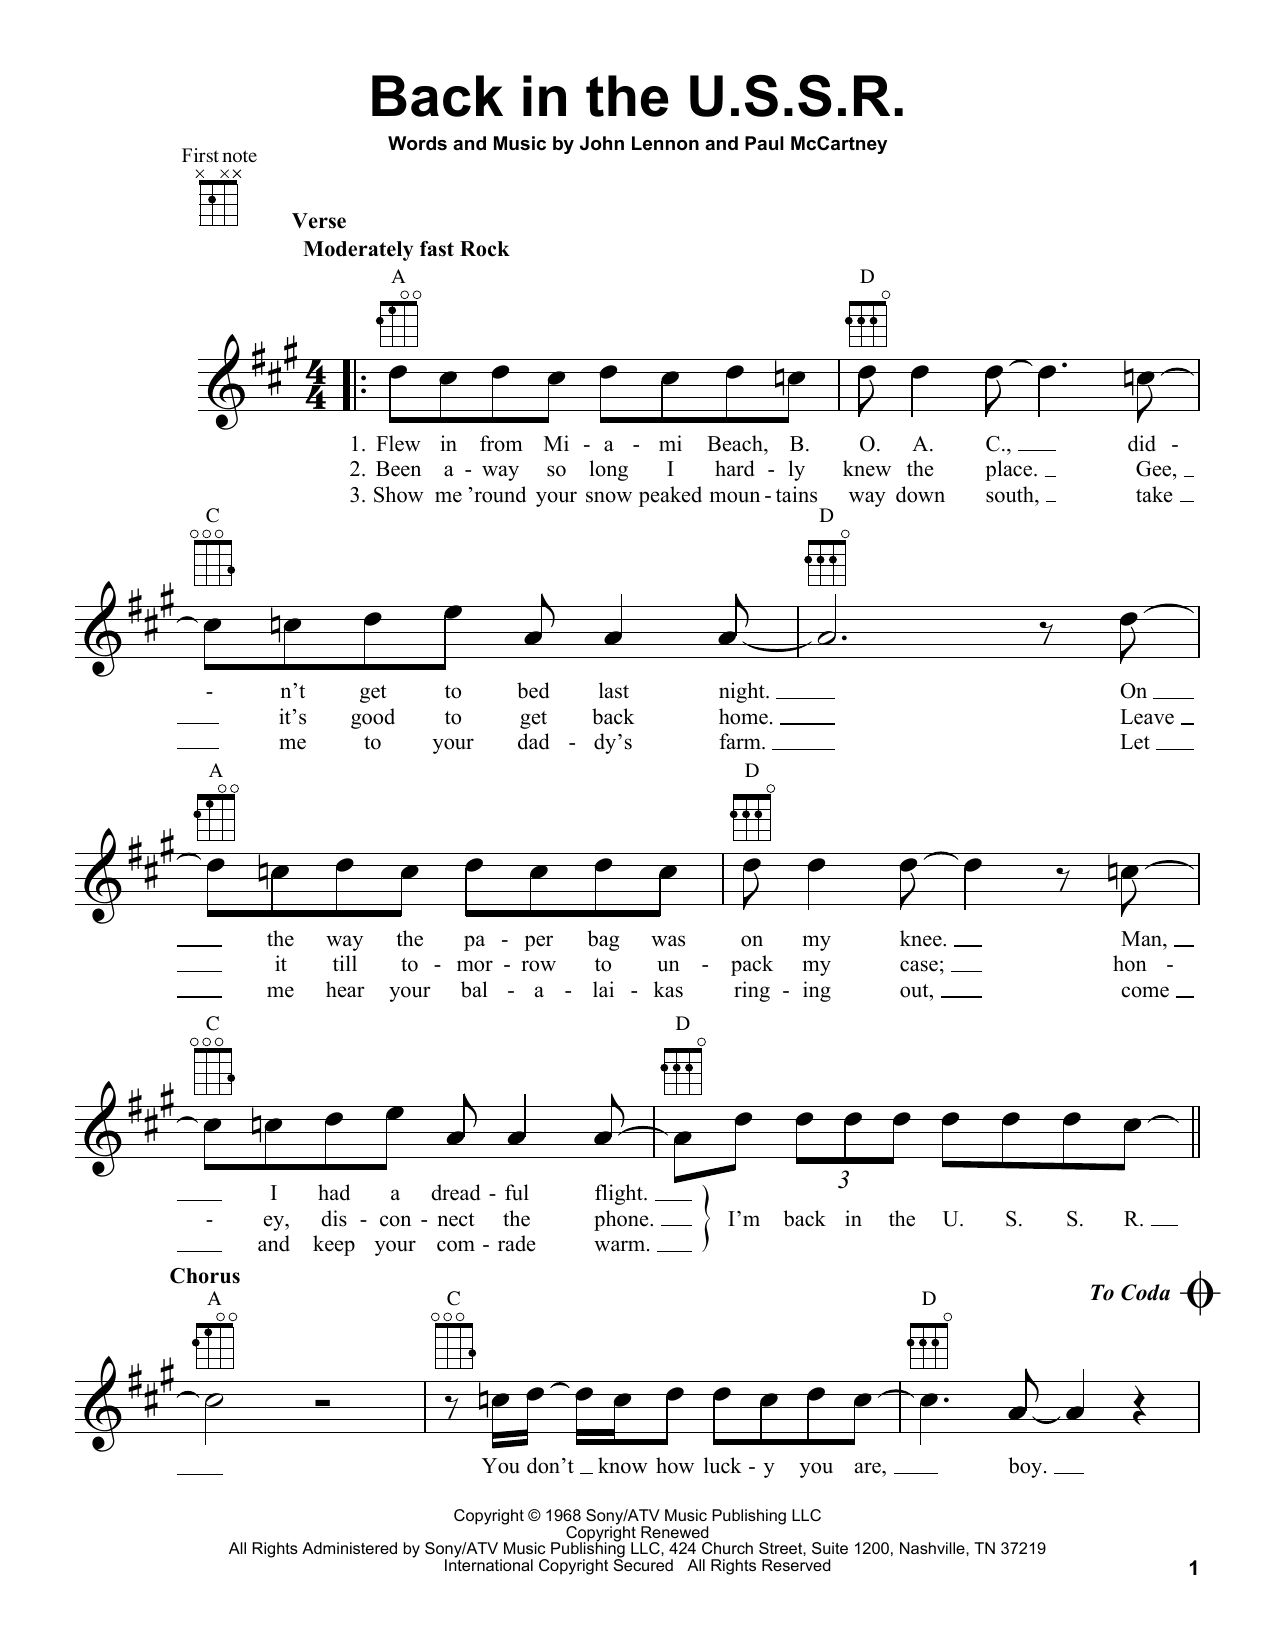 Download The Beatles Back In The U.S.S.R. Sheet Music